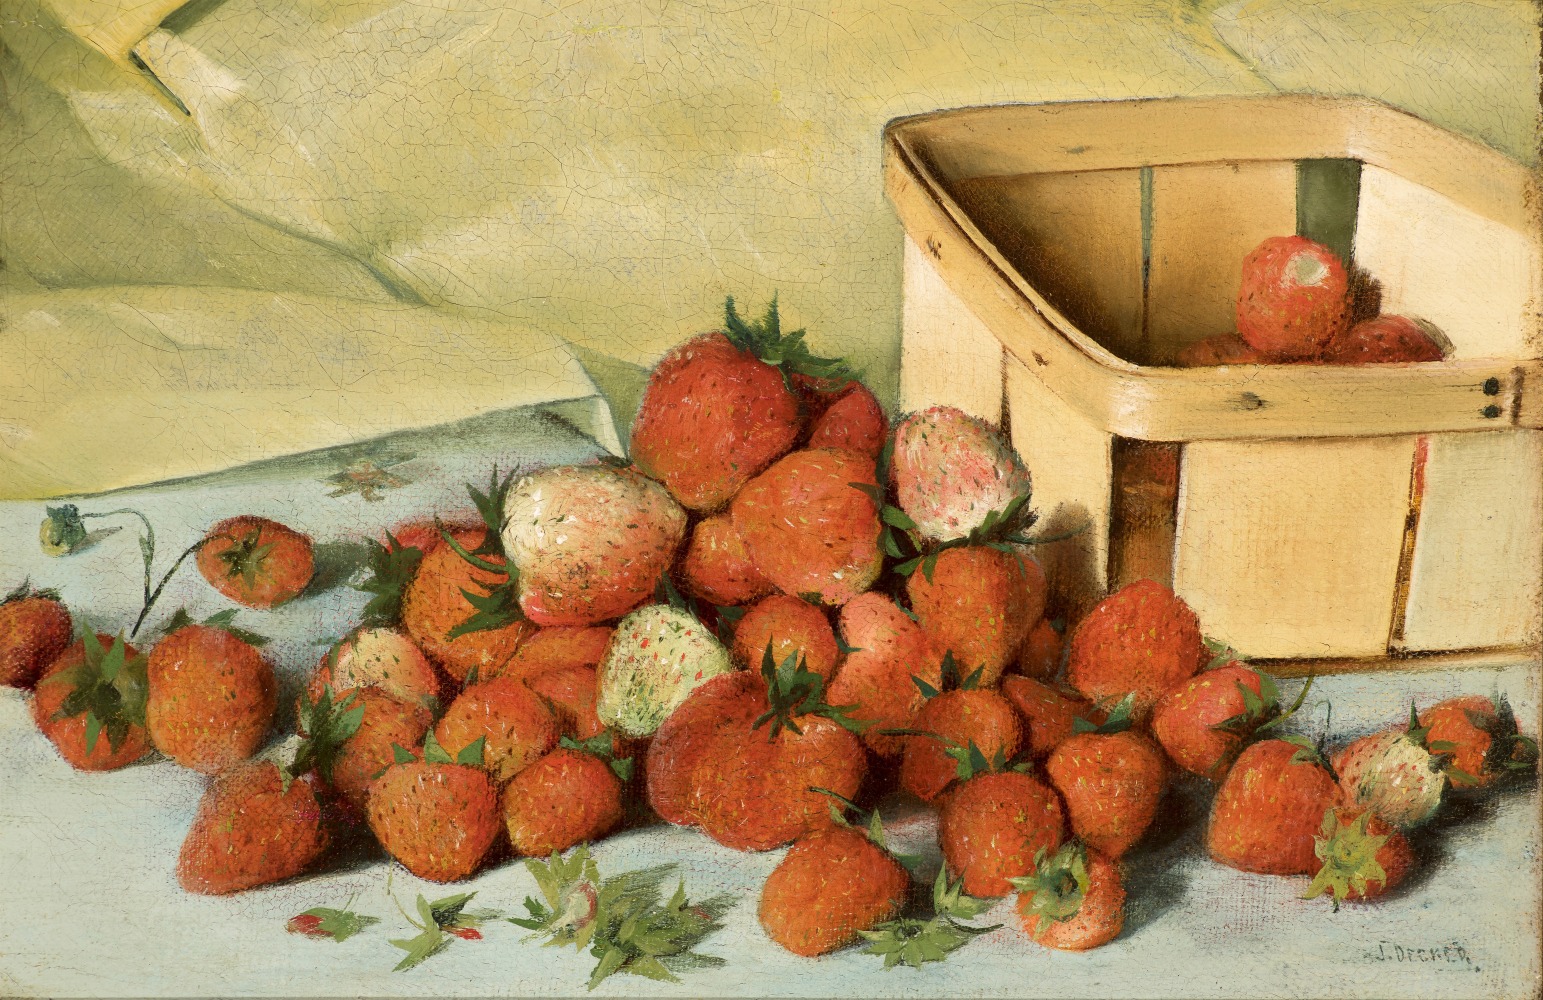 Joseph Decker (1853–1924), Still Life with Strawberries, c. 1885, oil on canvas, 8 x 11 7/8 in., signed lower right: J. Decker